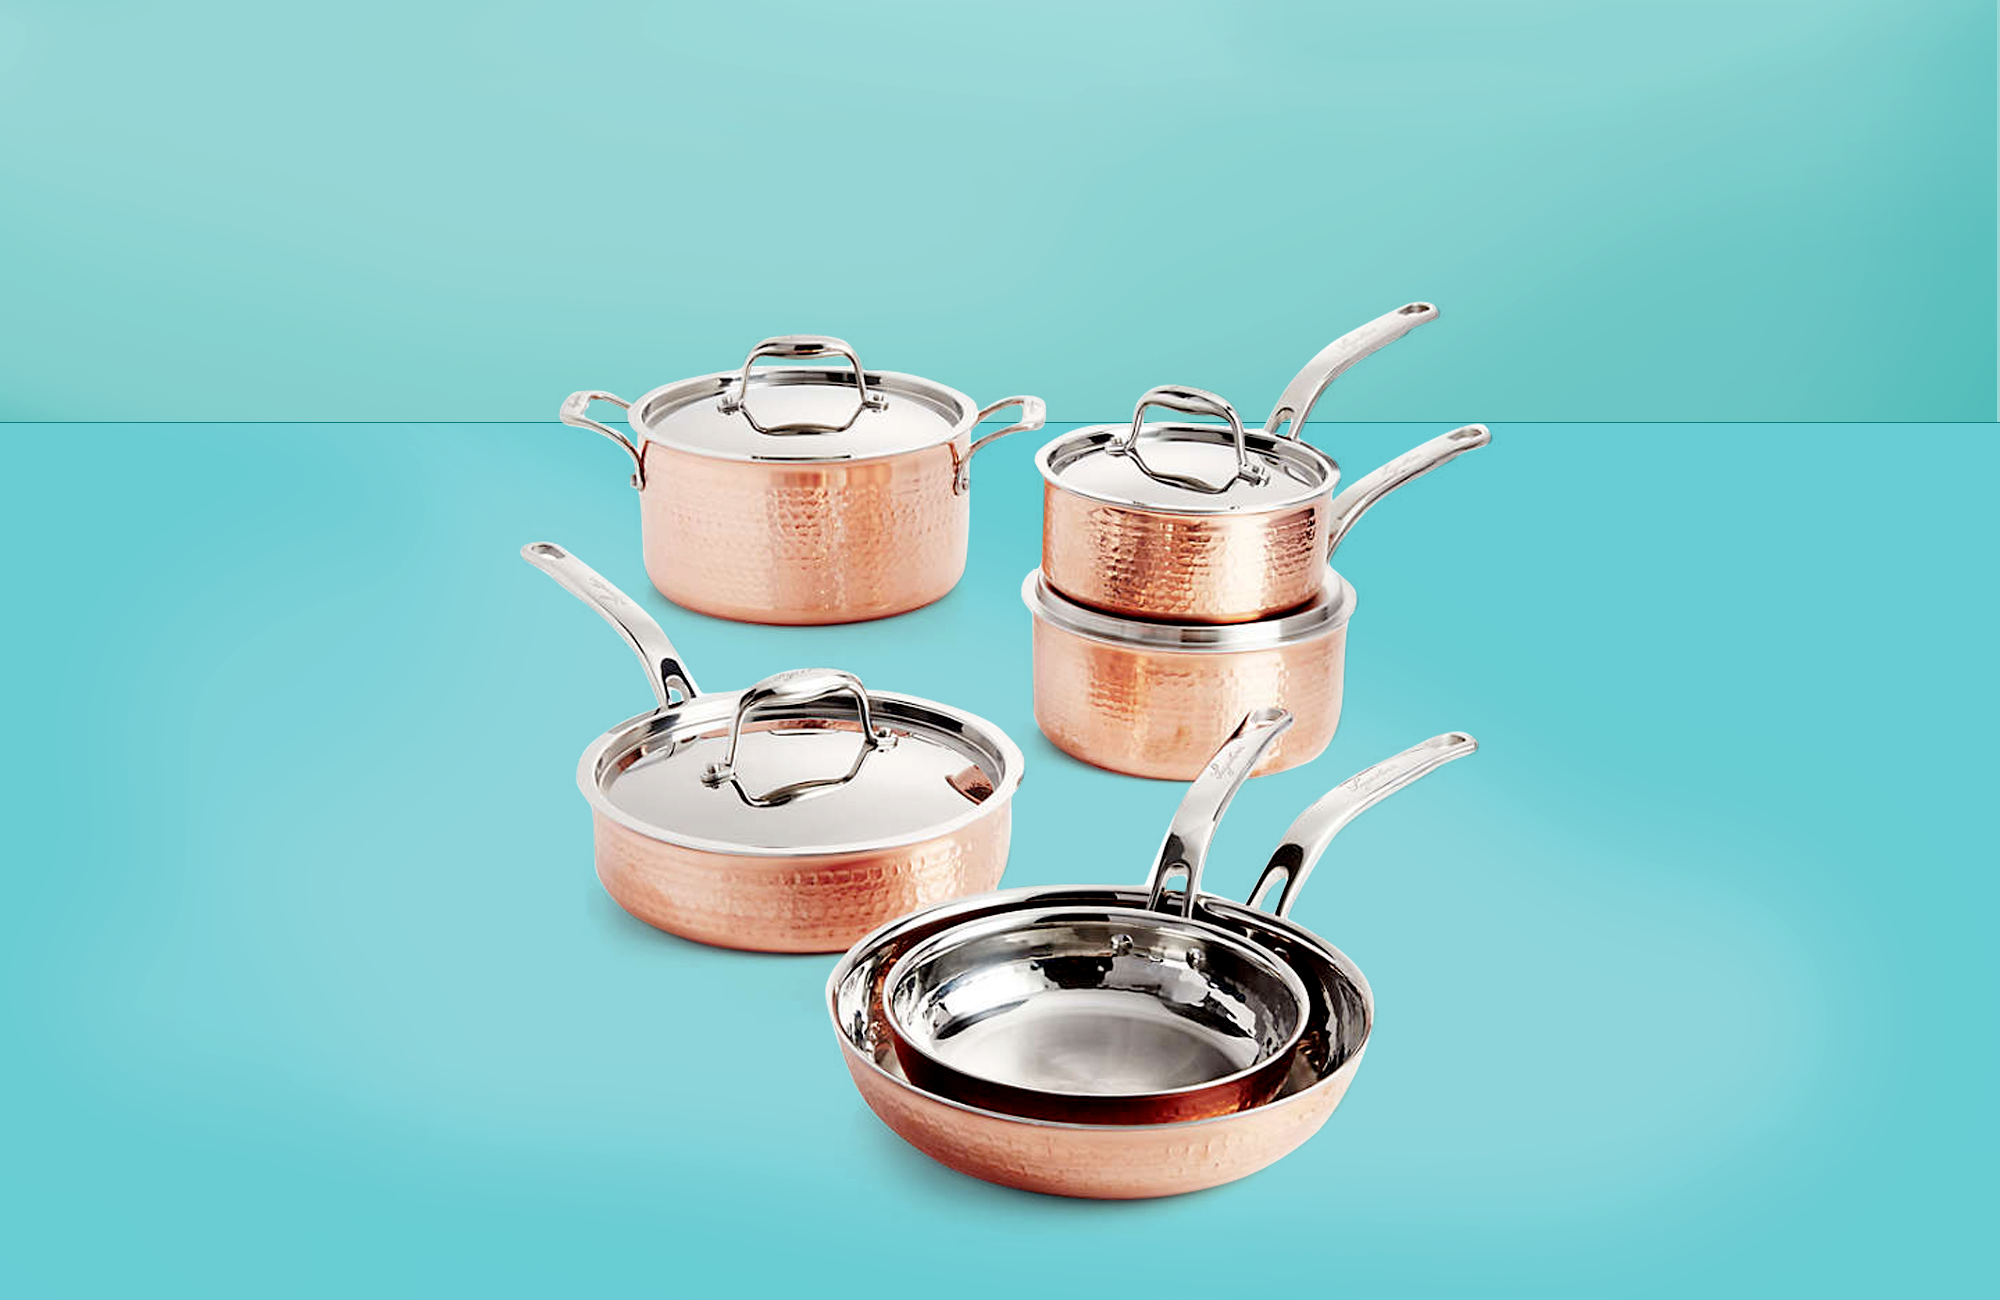 20 Best Copper Cookware to Buy in 20   Copper Cookware Sets and ...